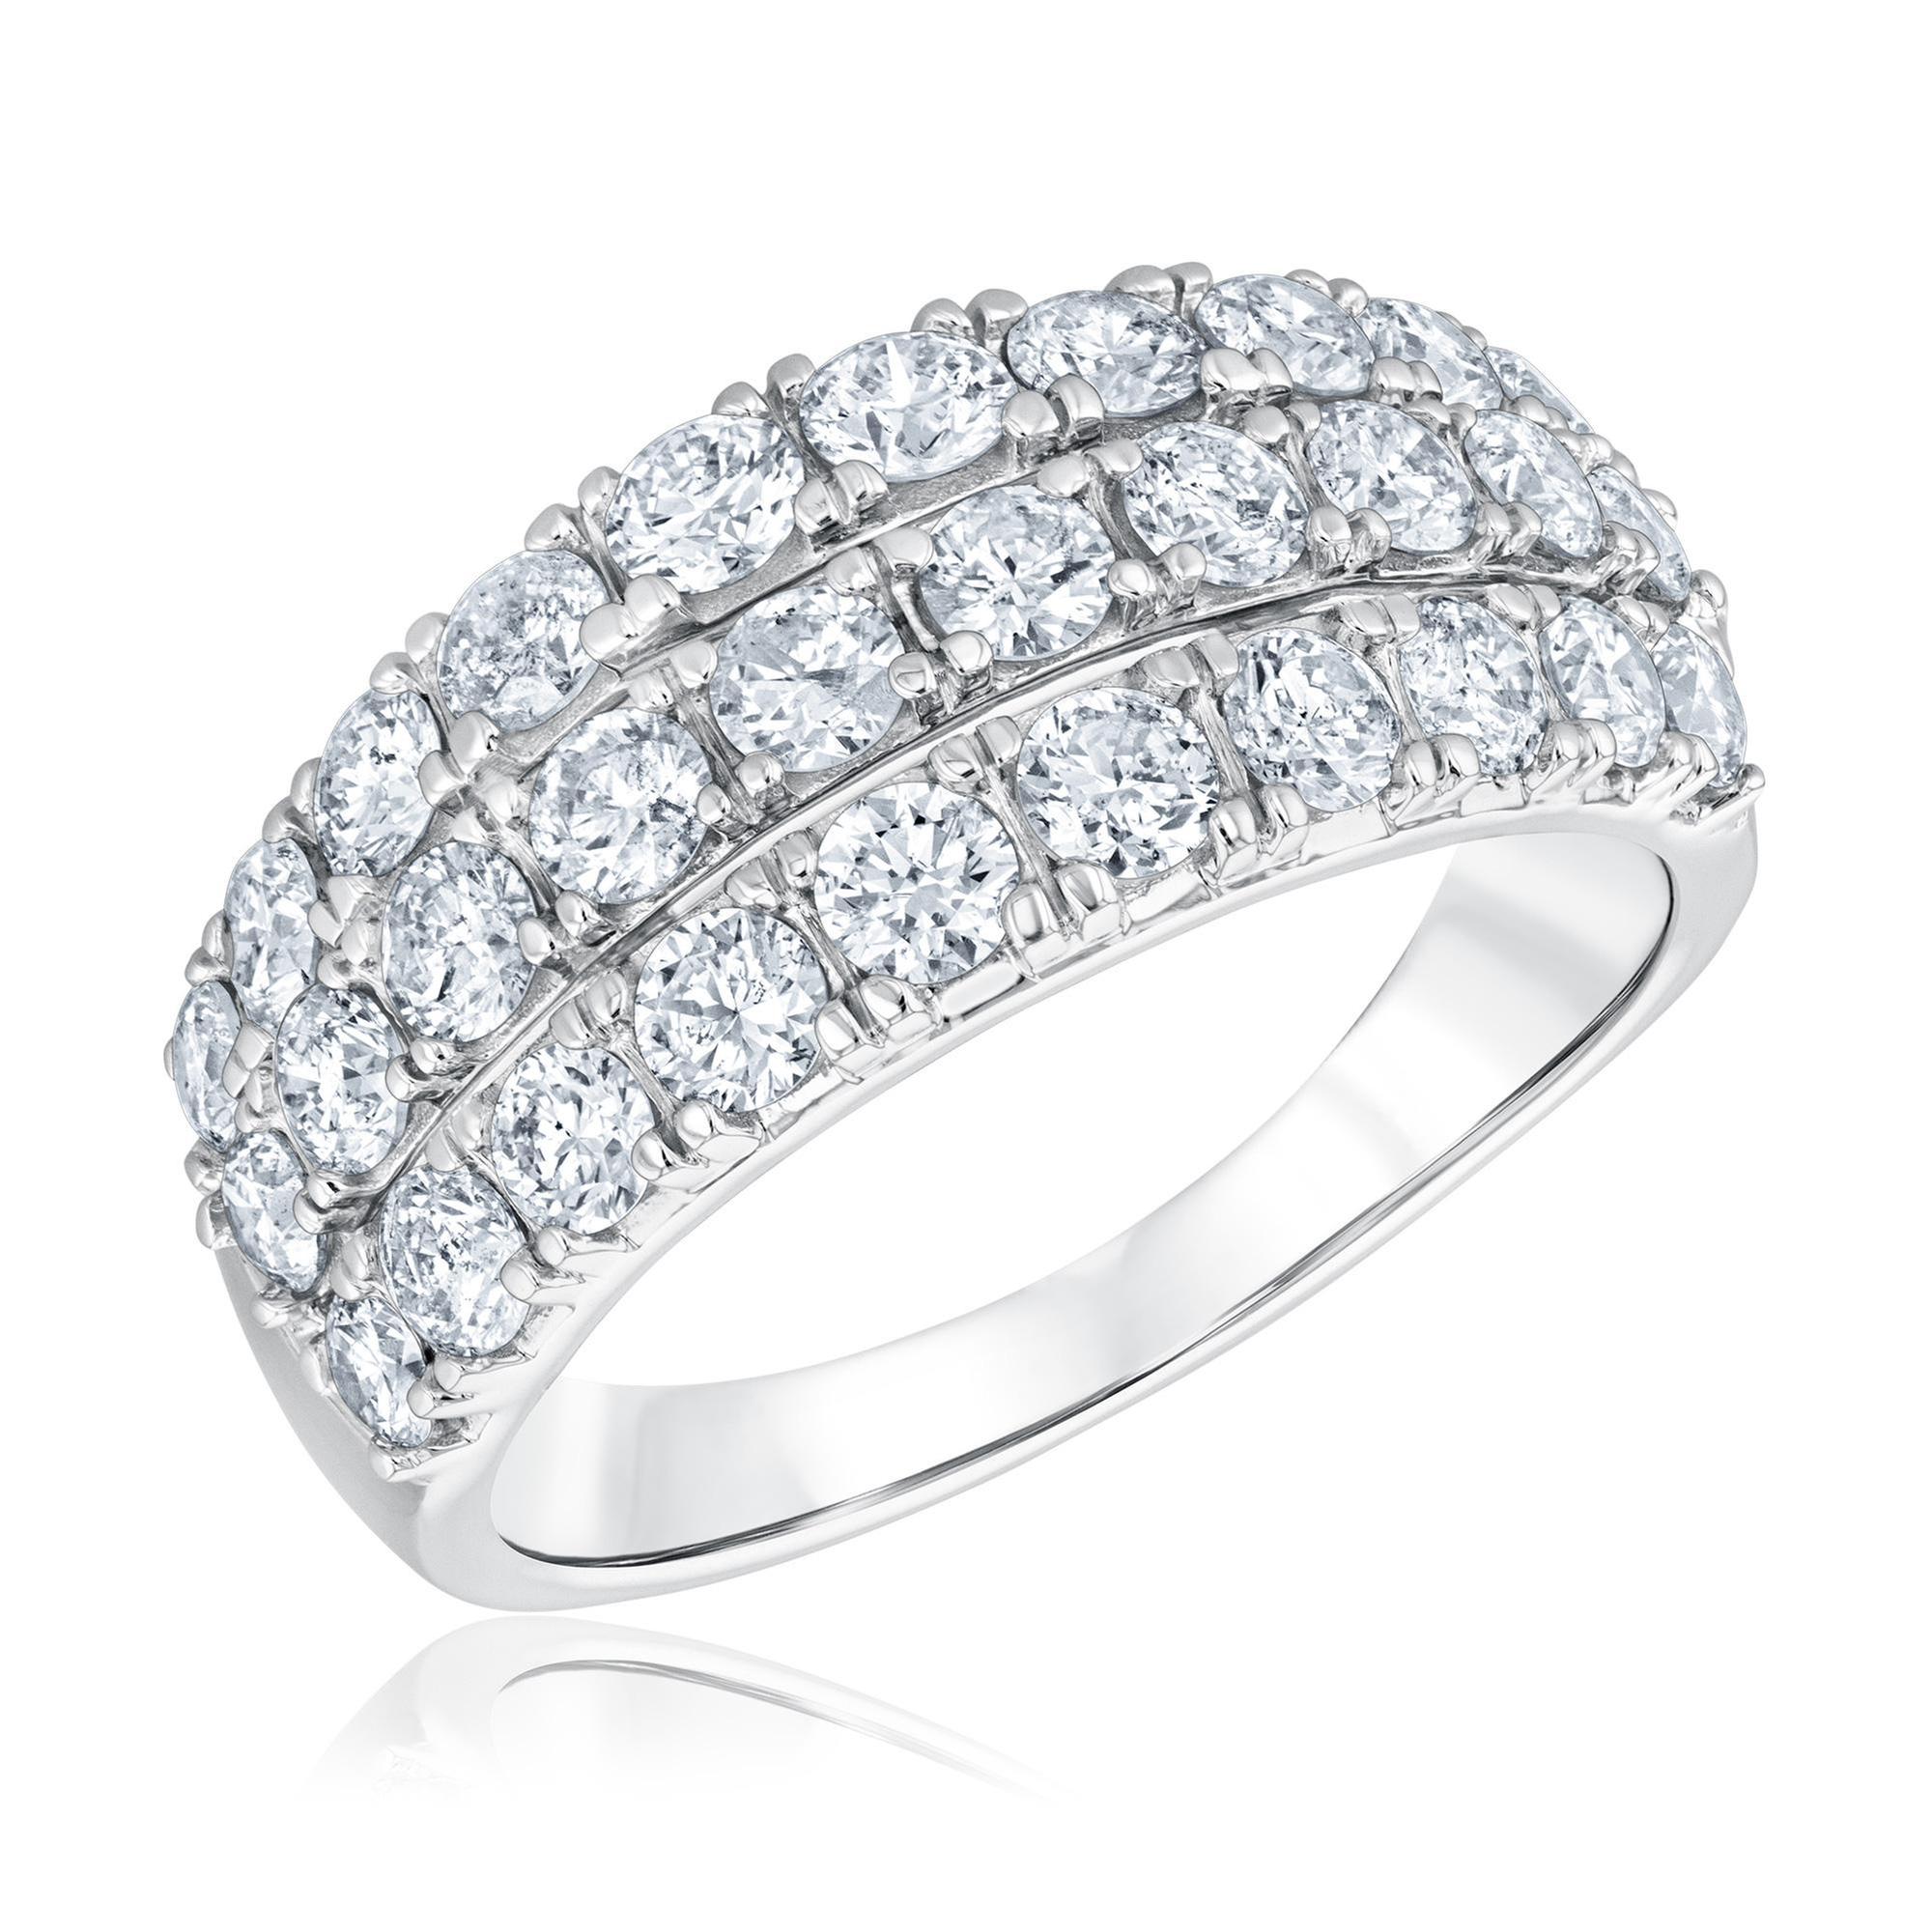 Details about   0.25Ct Round Cut White Diamond 14K White Gold Over Anniversary Band Guard Ring